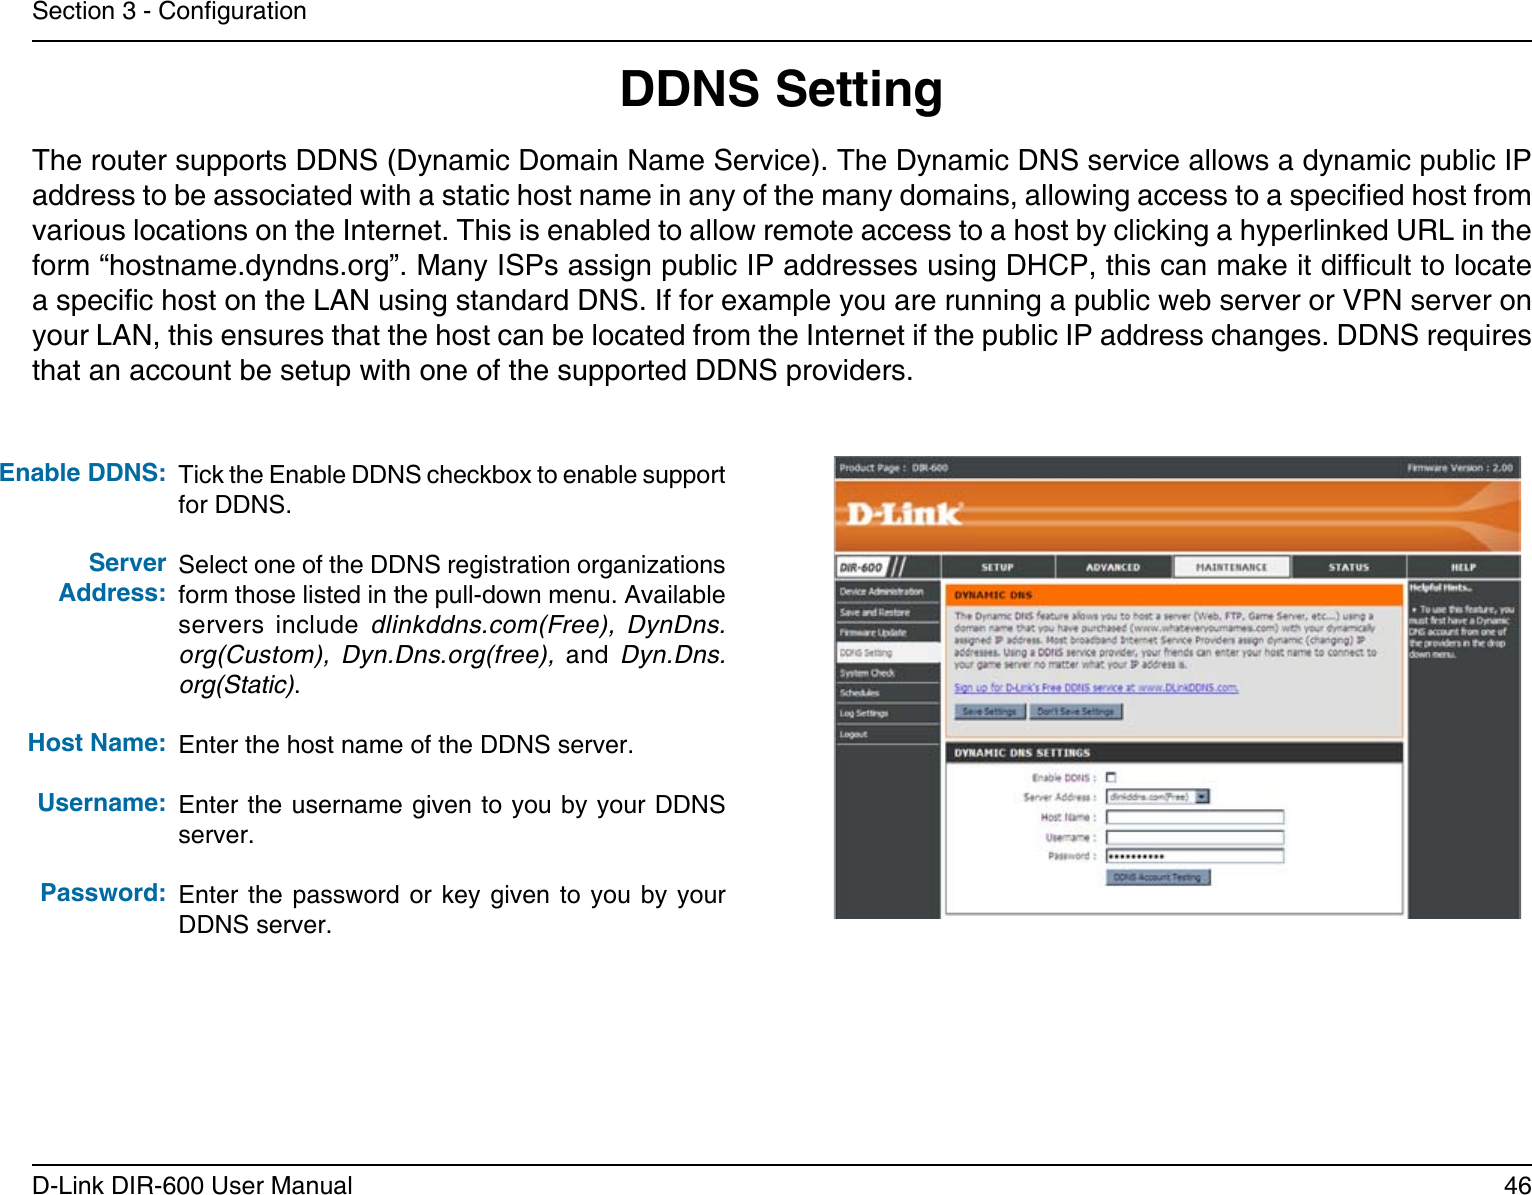 46D-Link DIR-600 User ManualSection 3 - CongurationDDNS SettingTick the Enable DDNS checkbox to enable support for DDNS.Select one of the DDNS registration organizations form those listed in the pull-down menu. Available servers  include  dlinkddns.com(Free),  DynDns.org(Custom),  Dyn.Dns.org(free),  and  Dyn.Dns.org(Static).Enter the host name of the DDNS server.Enter the username given to you by your DDNS server.Enter the  password or key  given to you  by your DDNS server.Enable DDNS:Server Address:Host Name:Username:Password:The router supports DDNS (Dynamic Domain Name Service). The Dynamic DNS service allows a dynamic public IP address to be associated with a static host name in any of the many domains, allowing access to a specied host from various locations on the Internet. This is enabled to allow remote access to a host by clicking a hyperlinked URL in the form “hostname.dyndns.org”. Many ISPs assign public IP addresses using DHCP, this can make it difcult to locate a specic host on the LAN using standard DNS. If for example you are running a public web server or VPN server on your LAN, this ensures that the host can be located from the Internet if the public IP address changes. DDNS requires that an account be setup with one of the supported DDNS providers.